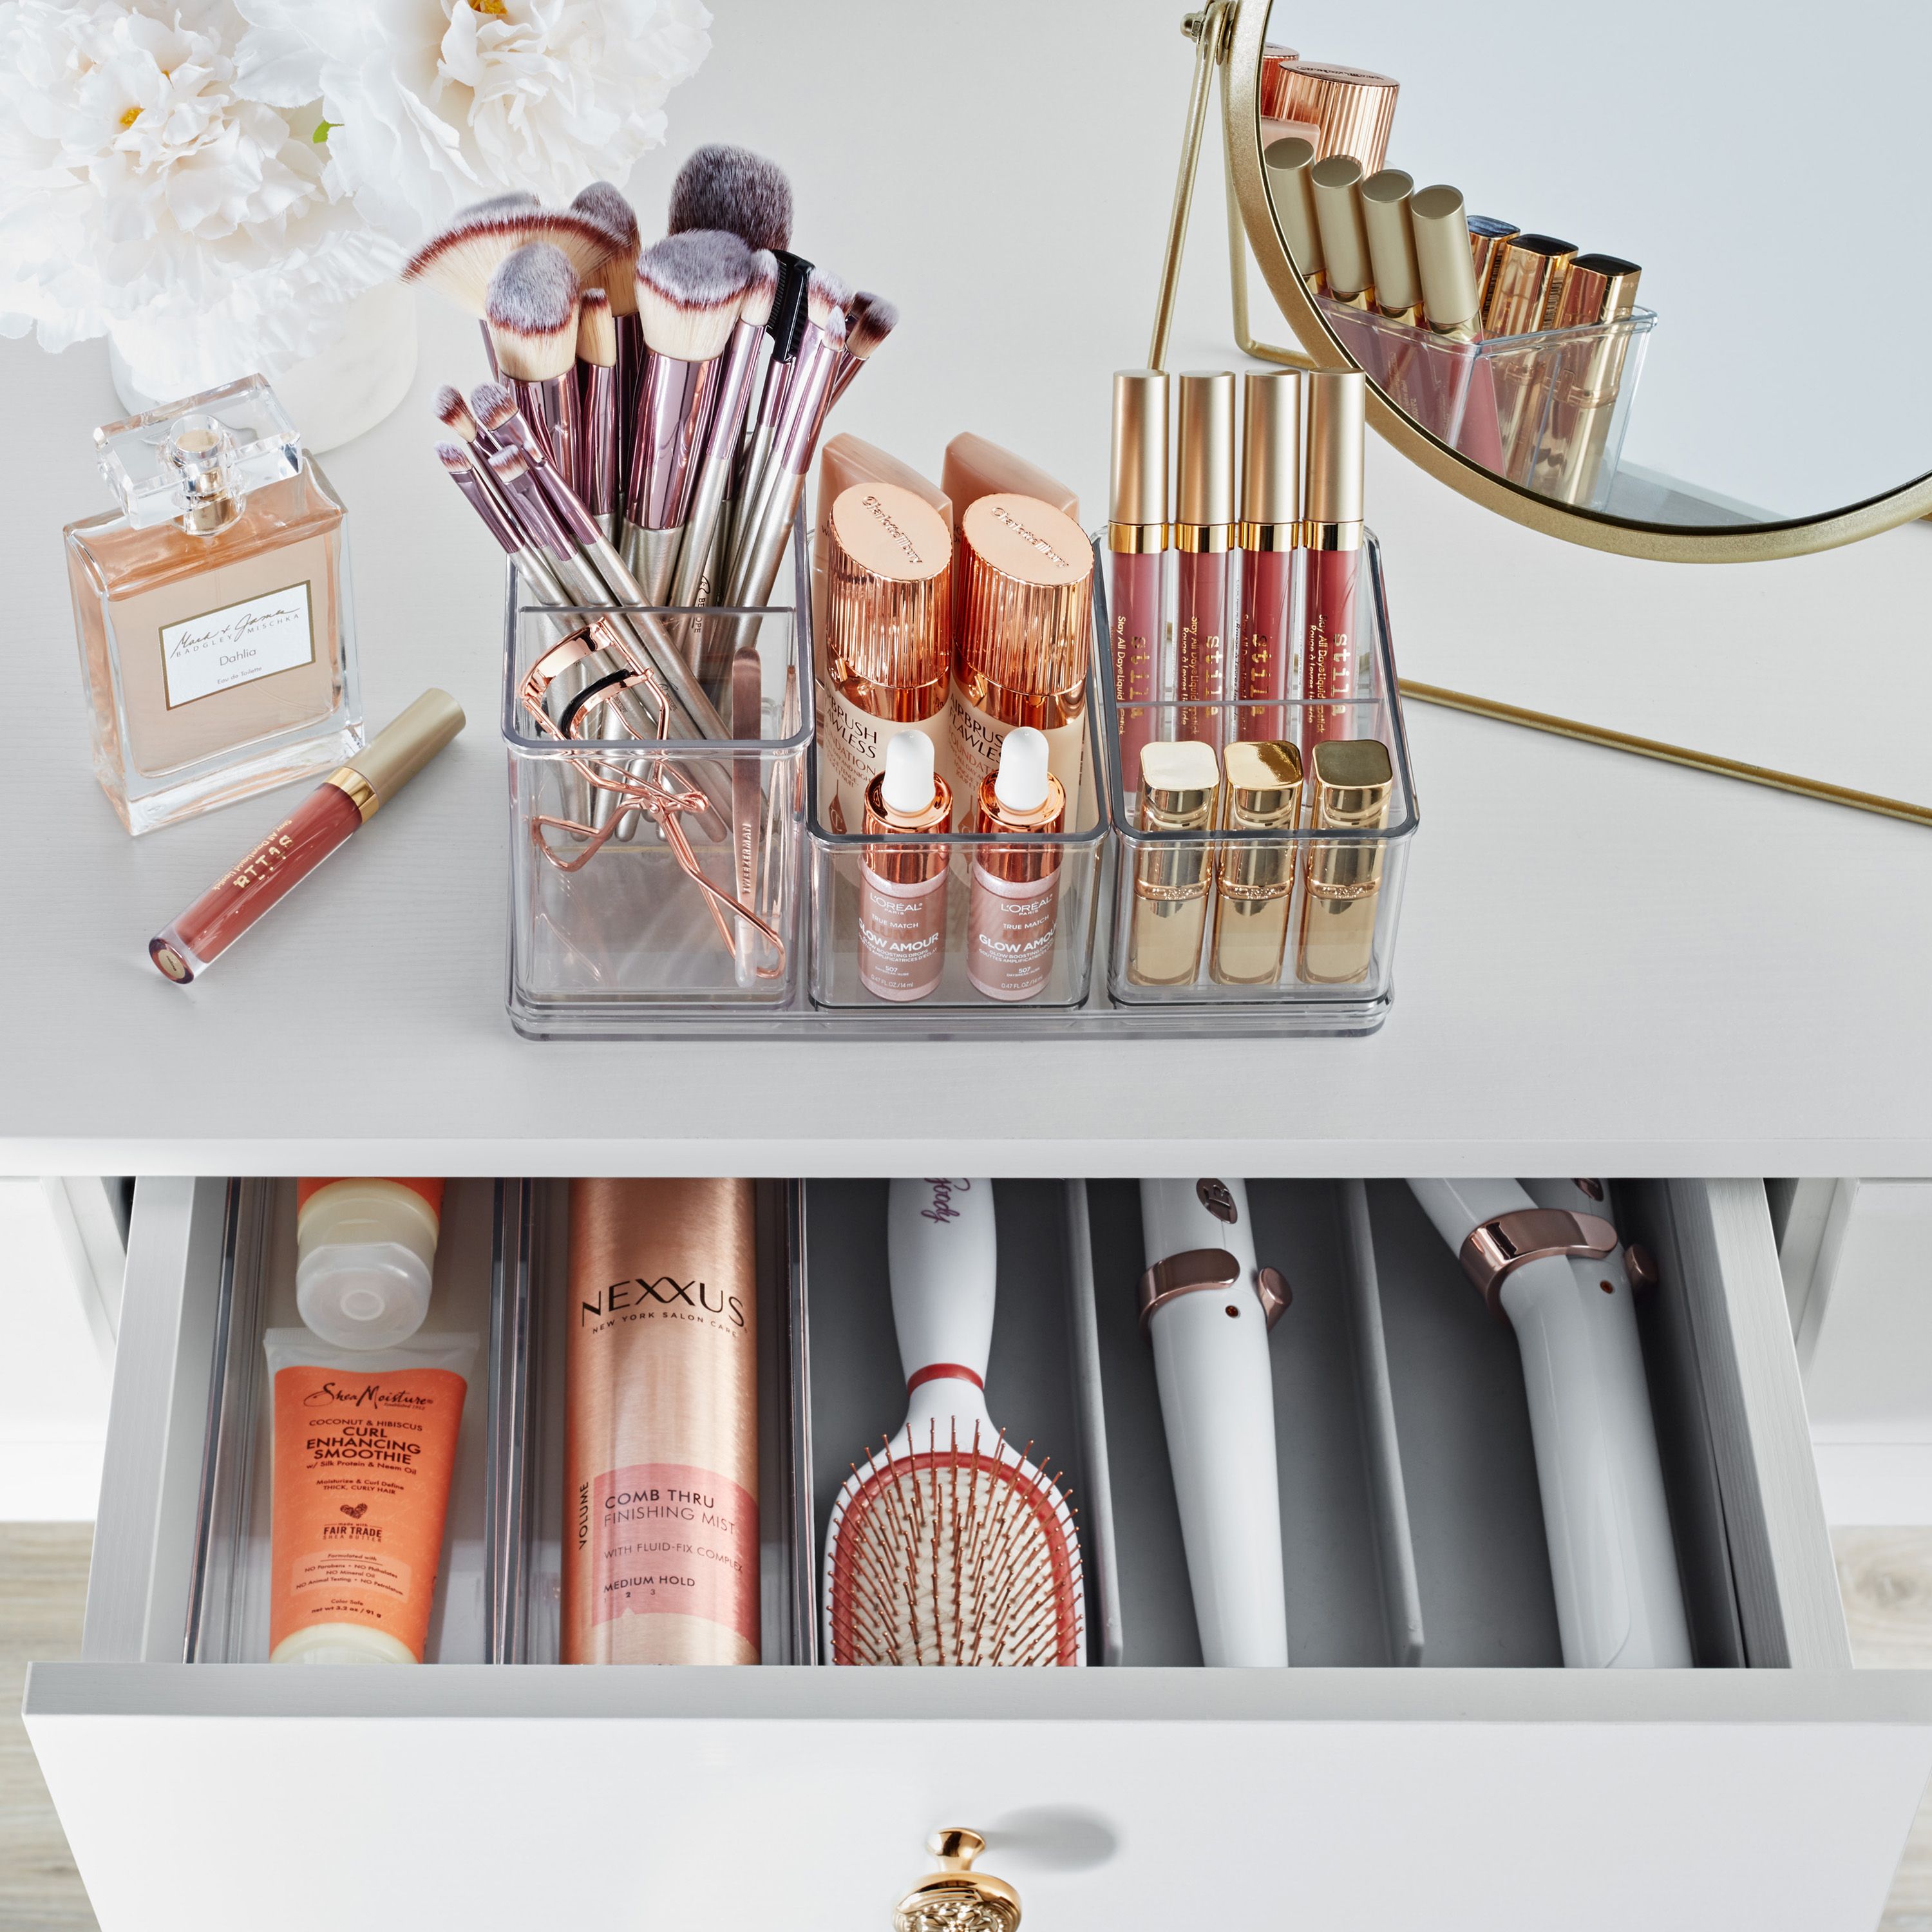 The Home Edit's Vanity & Makeup Organization Collection